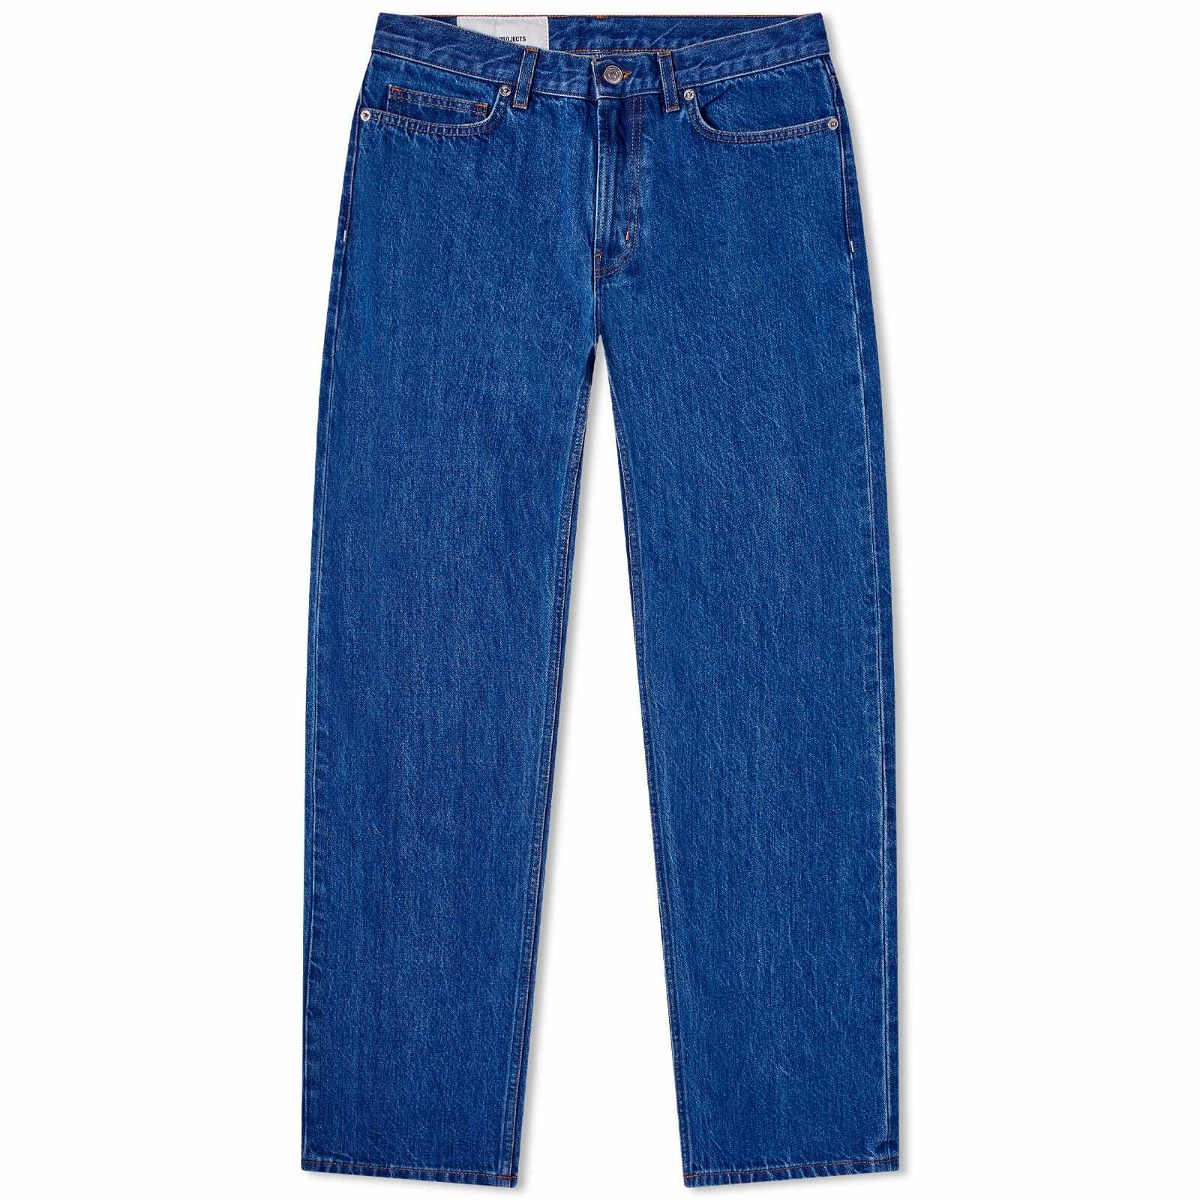 Norse Projects Men's Regular Denim Jeans in Vintage Indigo Norse Projects